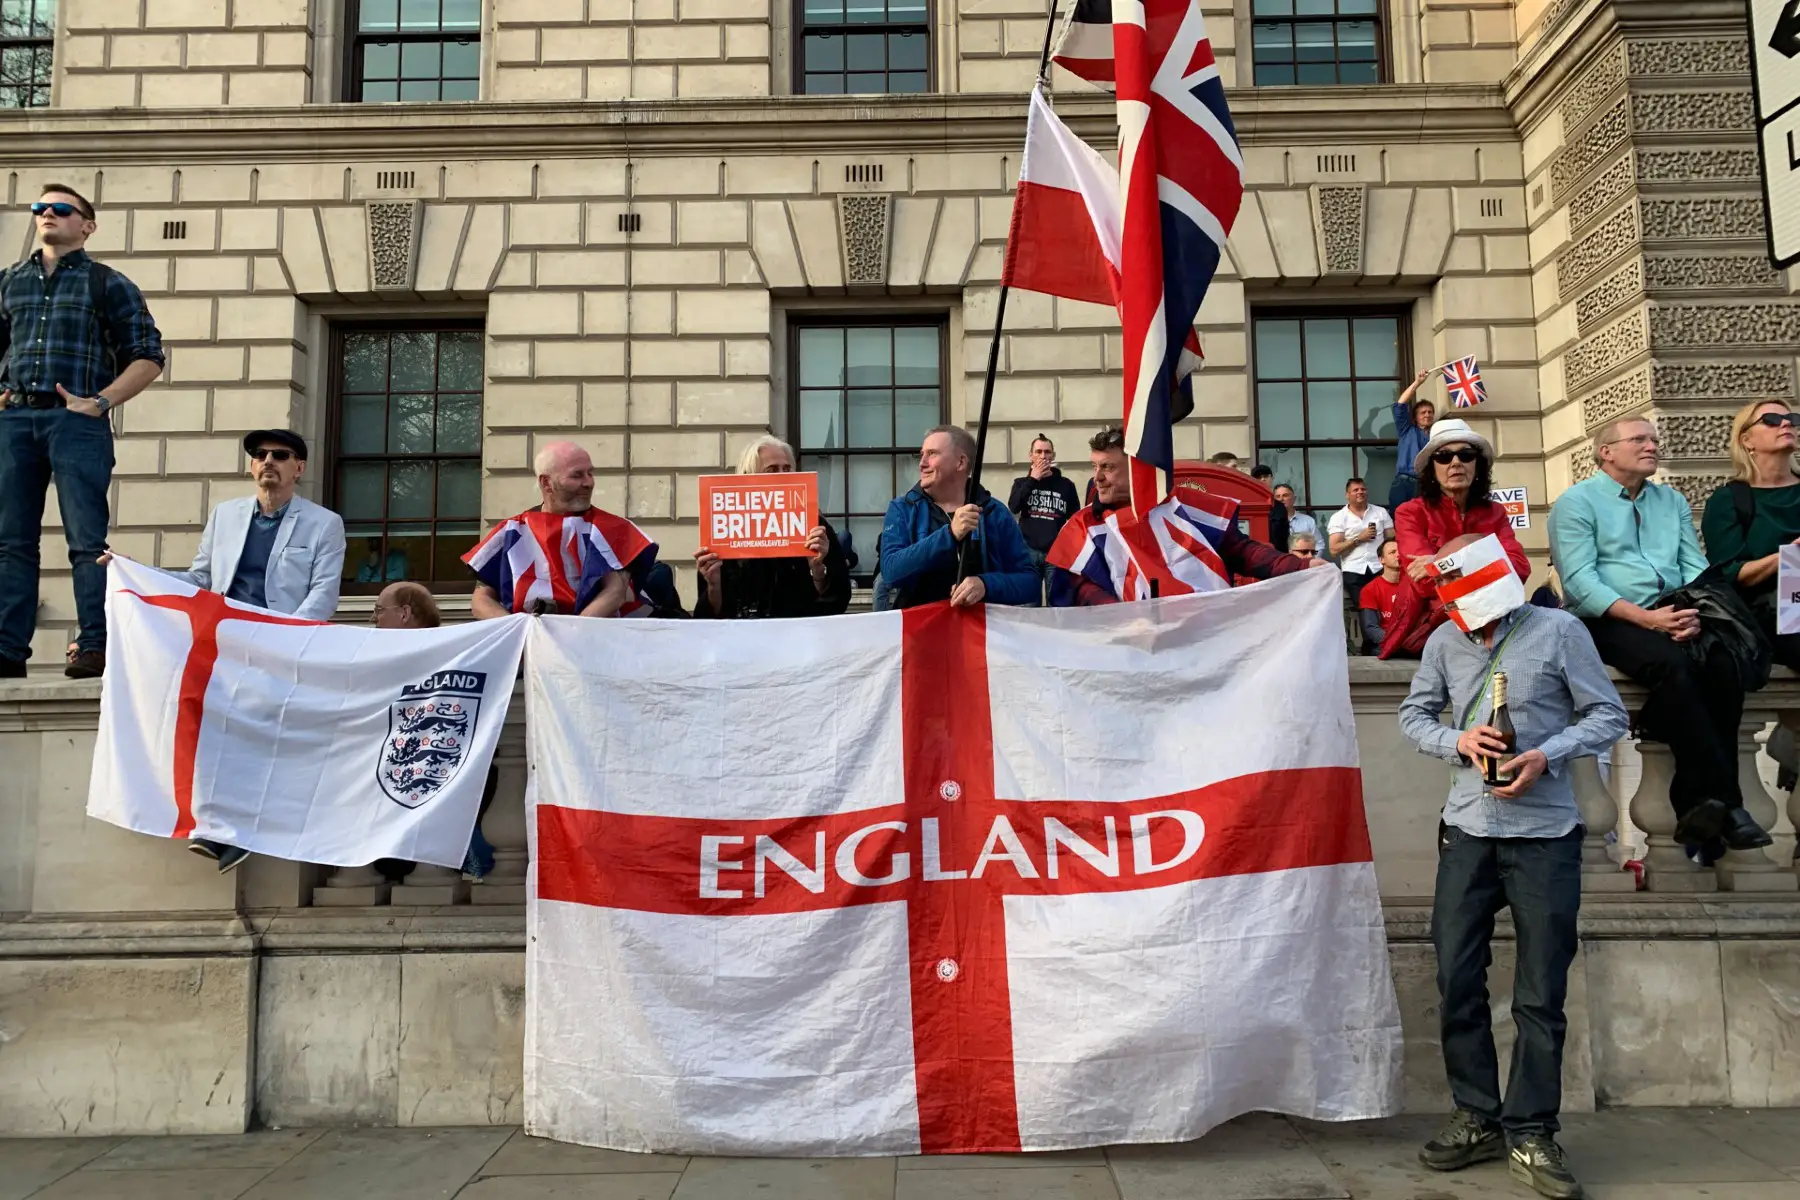 People holding an England flag and a sign that says 